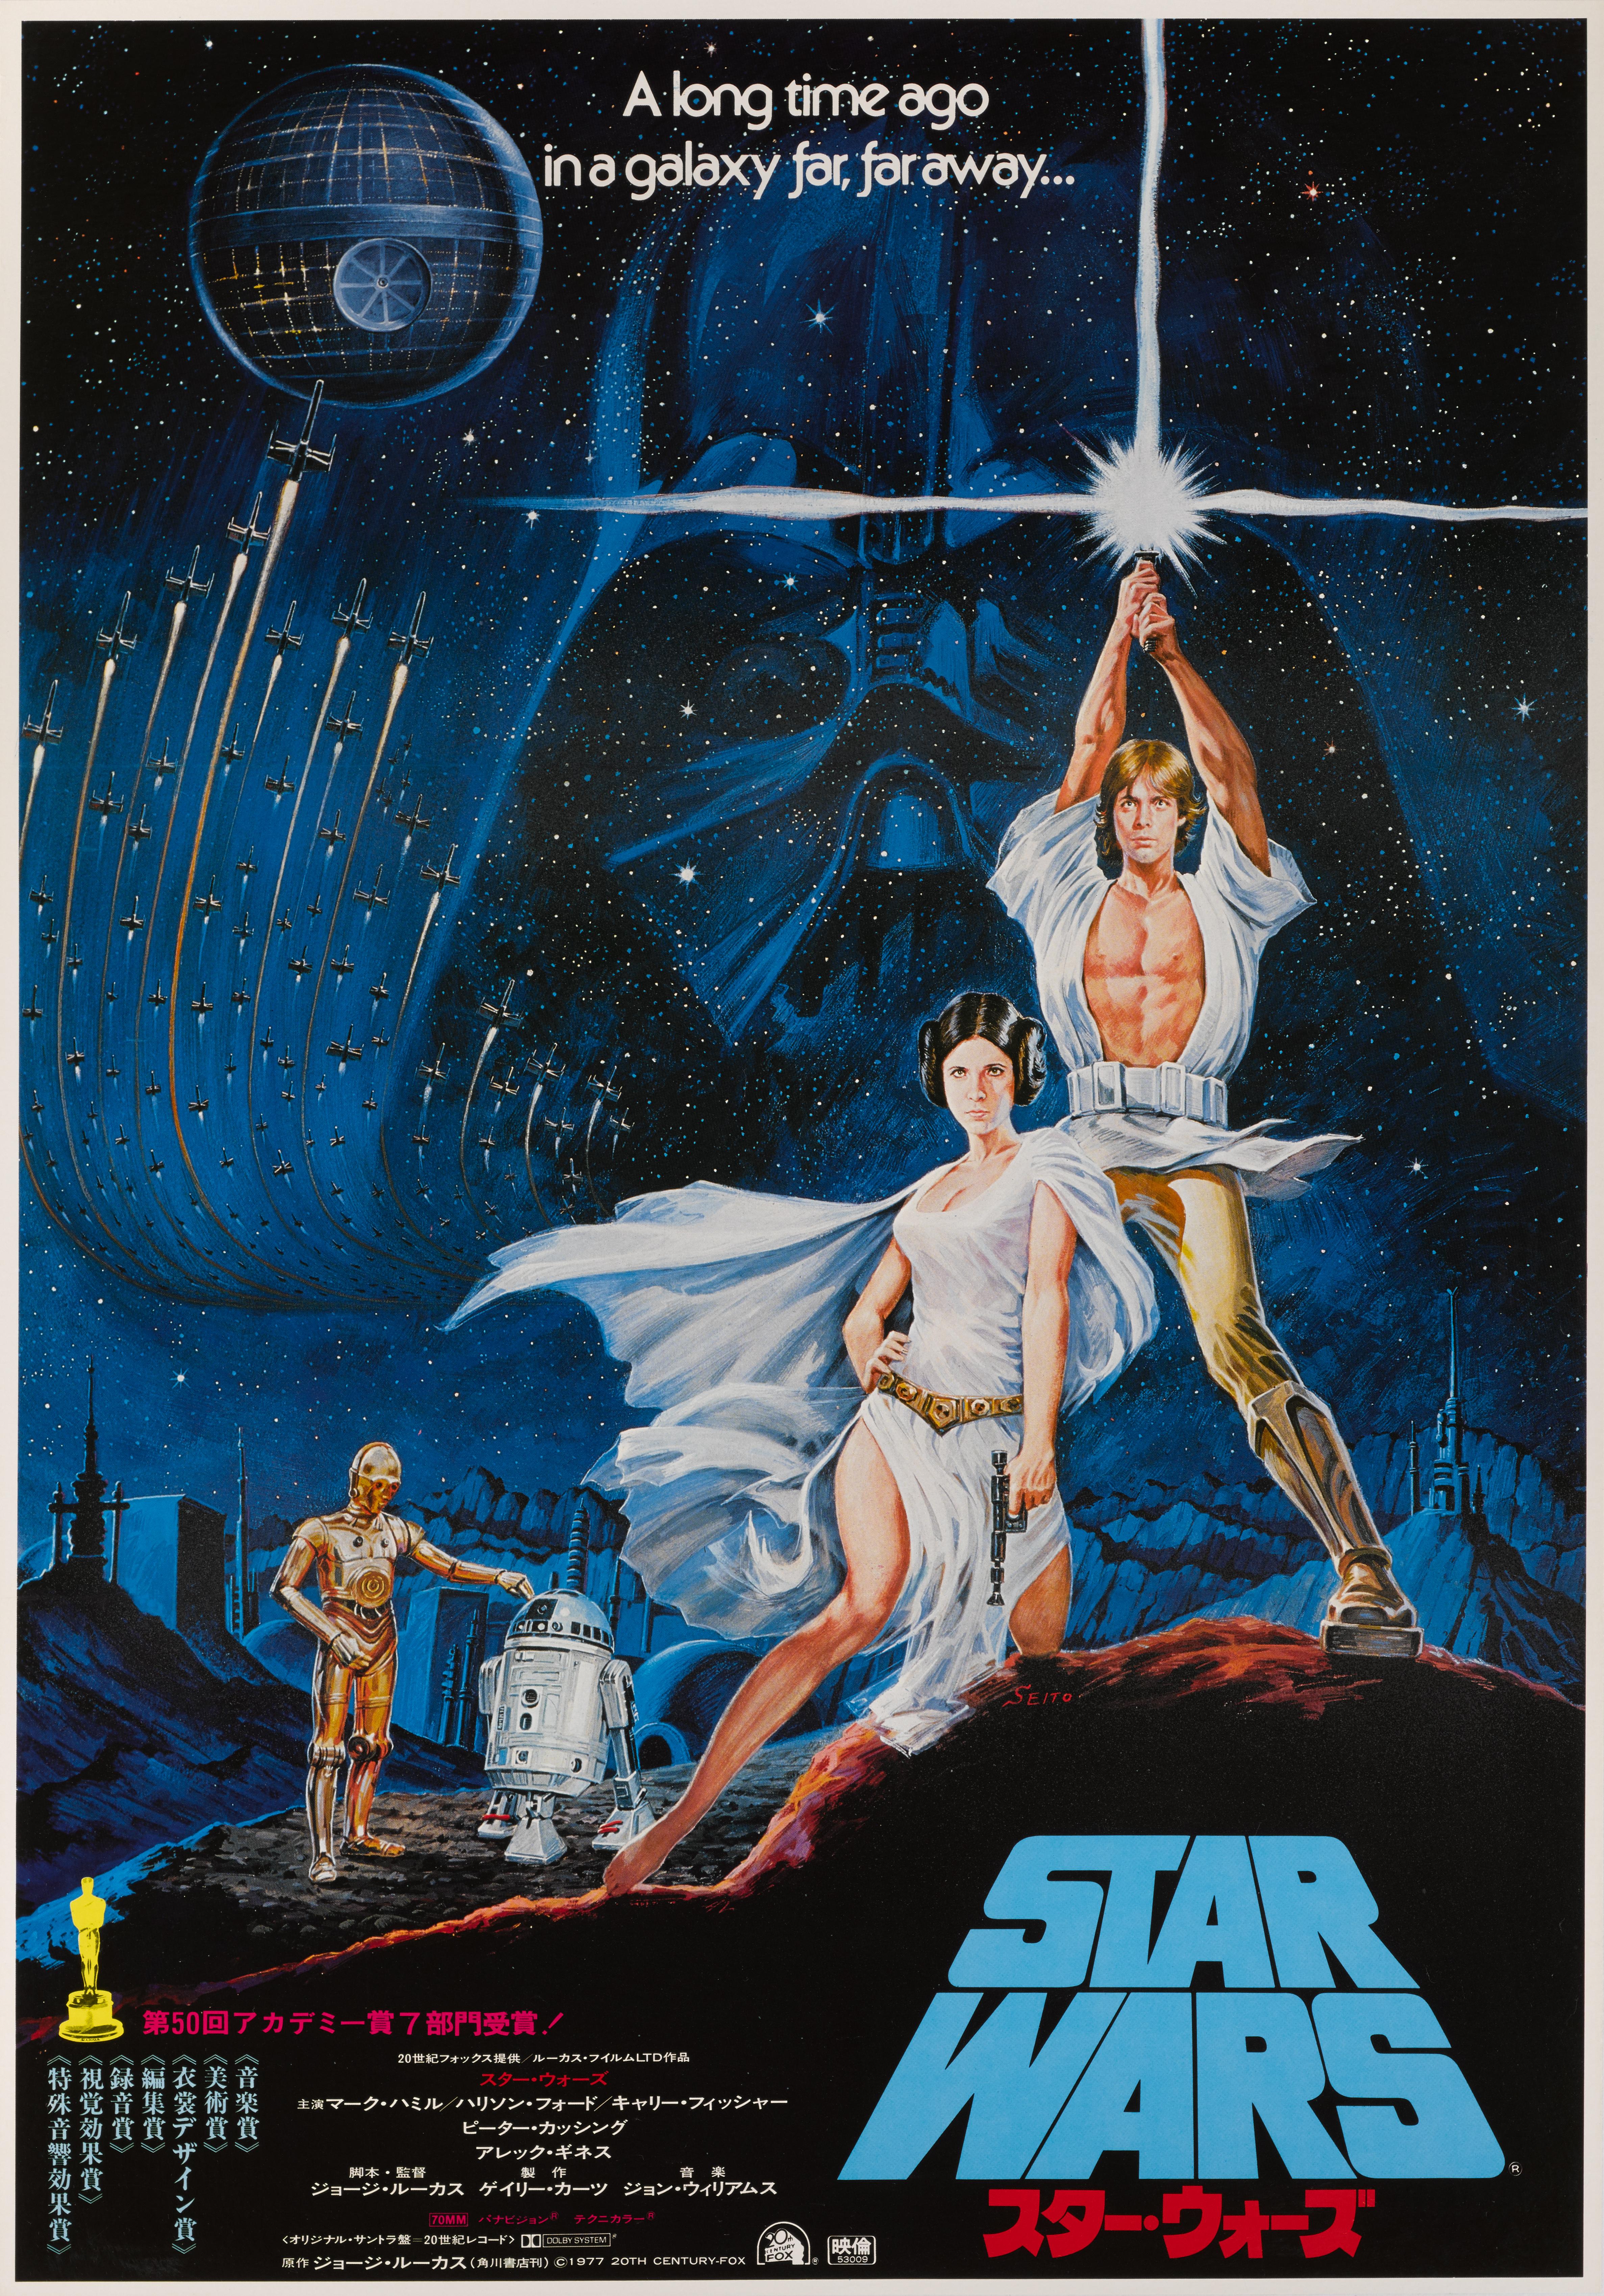 Original Japanese film poster for Star Wars 1977.
This poster is unfolded and conservation linen backed in near mint condition. The art work on this poster is by Seito (dates unknown)
The film was directed by George Lucas and starred Mark Hamill,